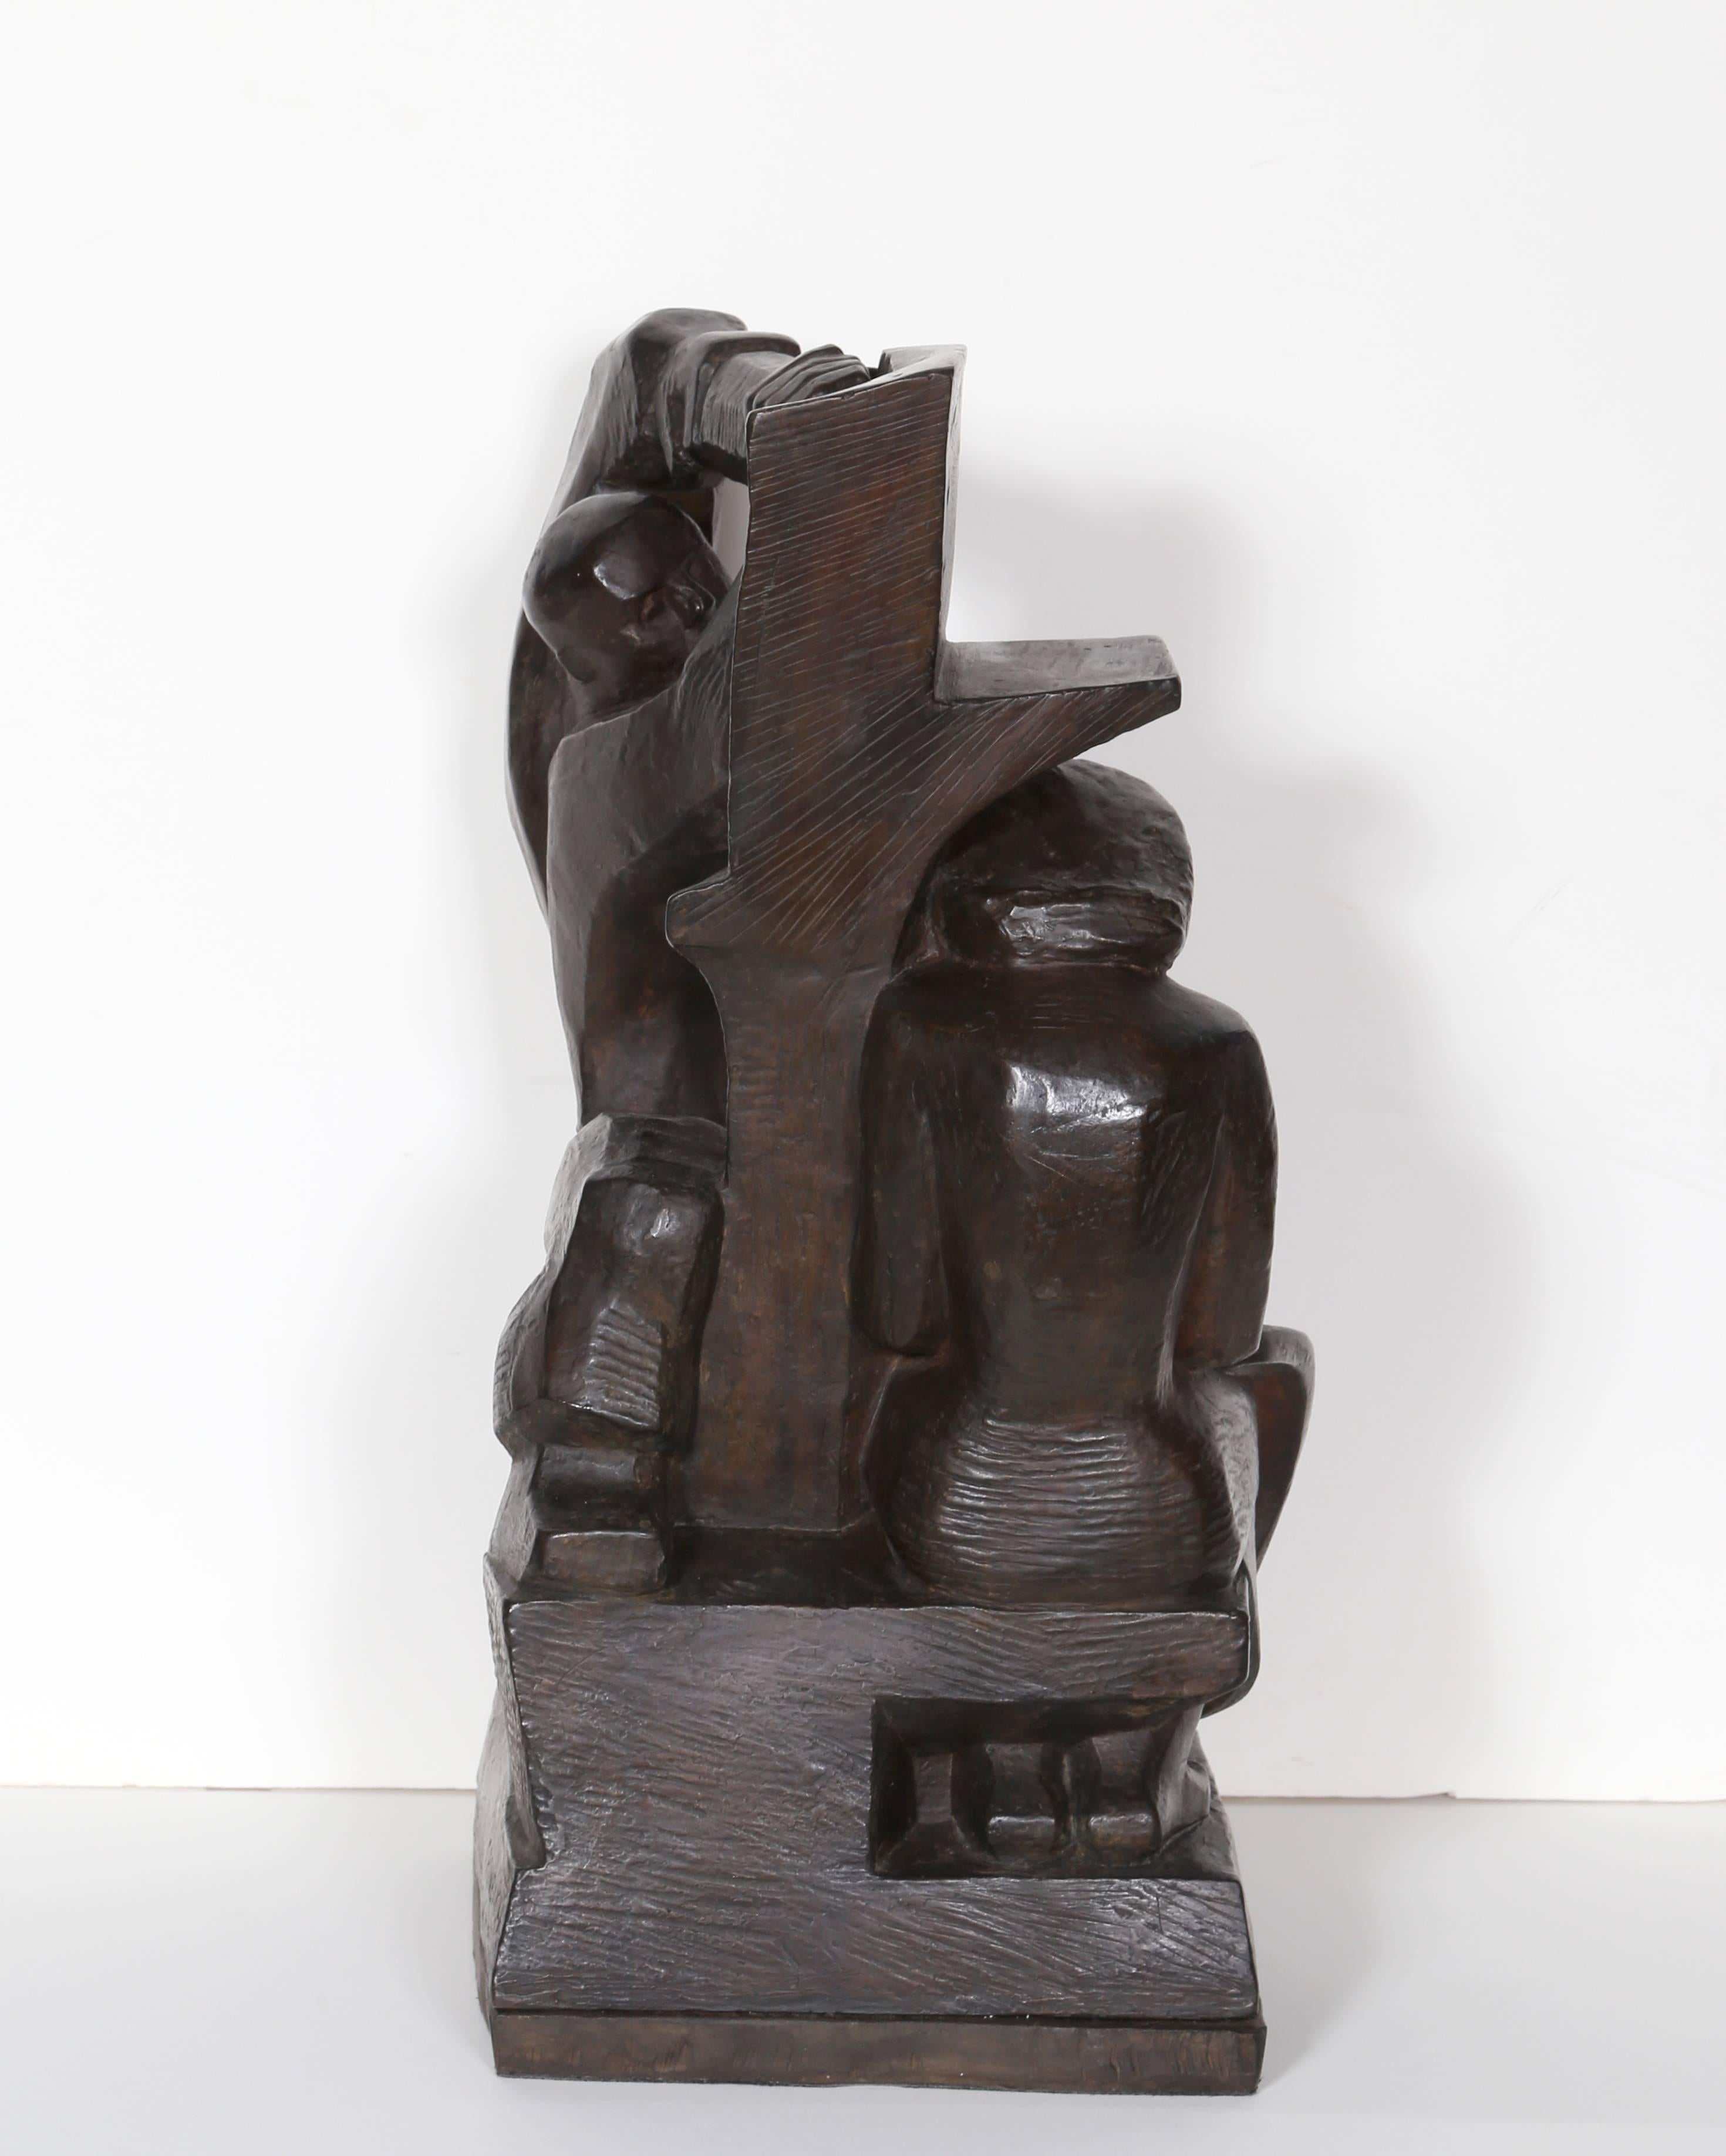 Artist: Robert Cronbach, American (1908 - 2001)
Title: Construction & Garment Worker 
Year: 1938
Medium: Bronze sculpture with Brown Patina, signature and date in the cast
Size: 18  x 11  x 9 in. (45.72  x 27.94  x 22.86 cm)
Overall height